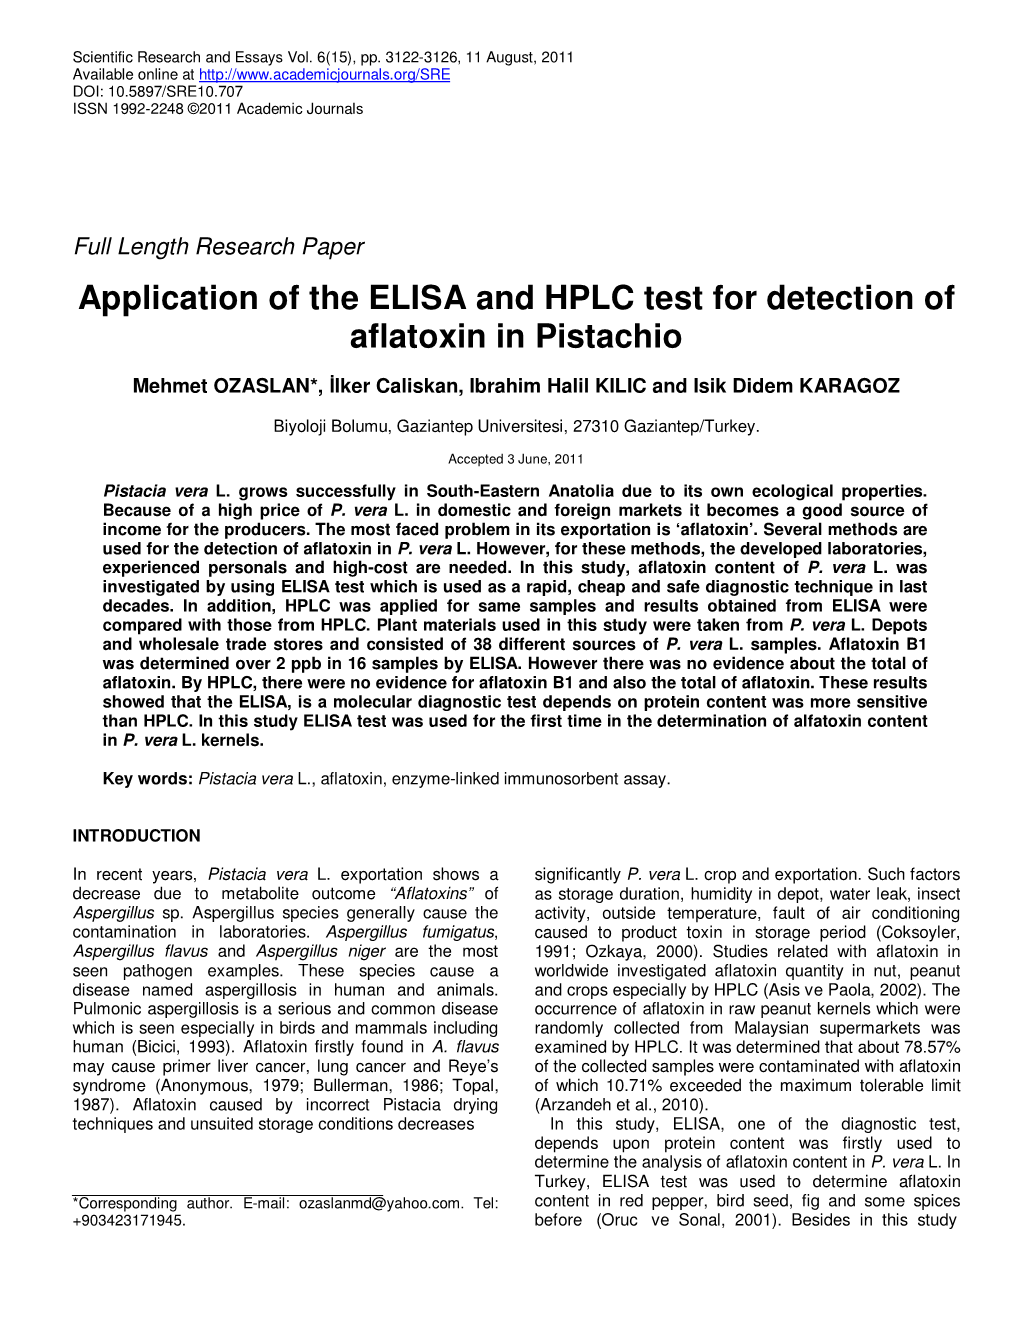 Application of the ELISA and HPLC Test for Detection of Aflatoxin in Pistachio